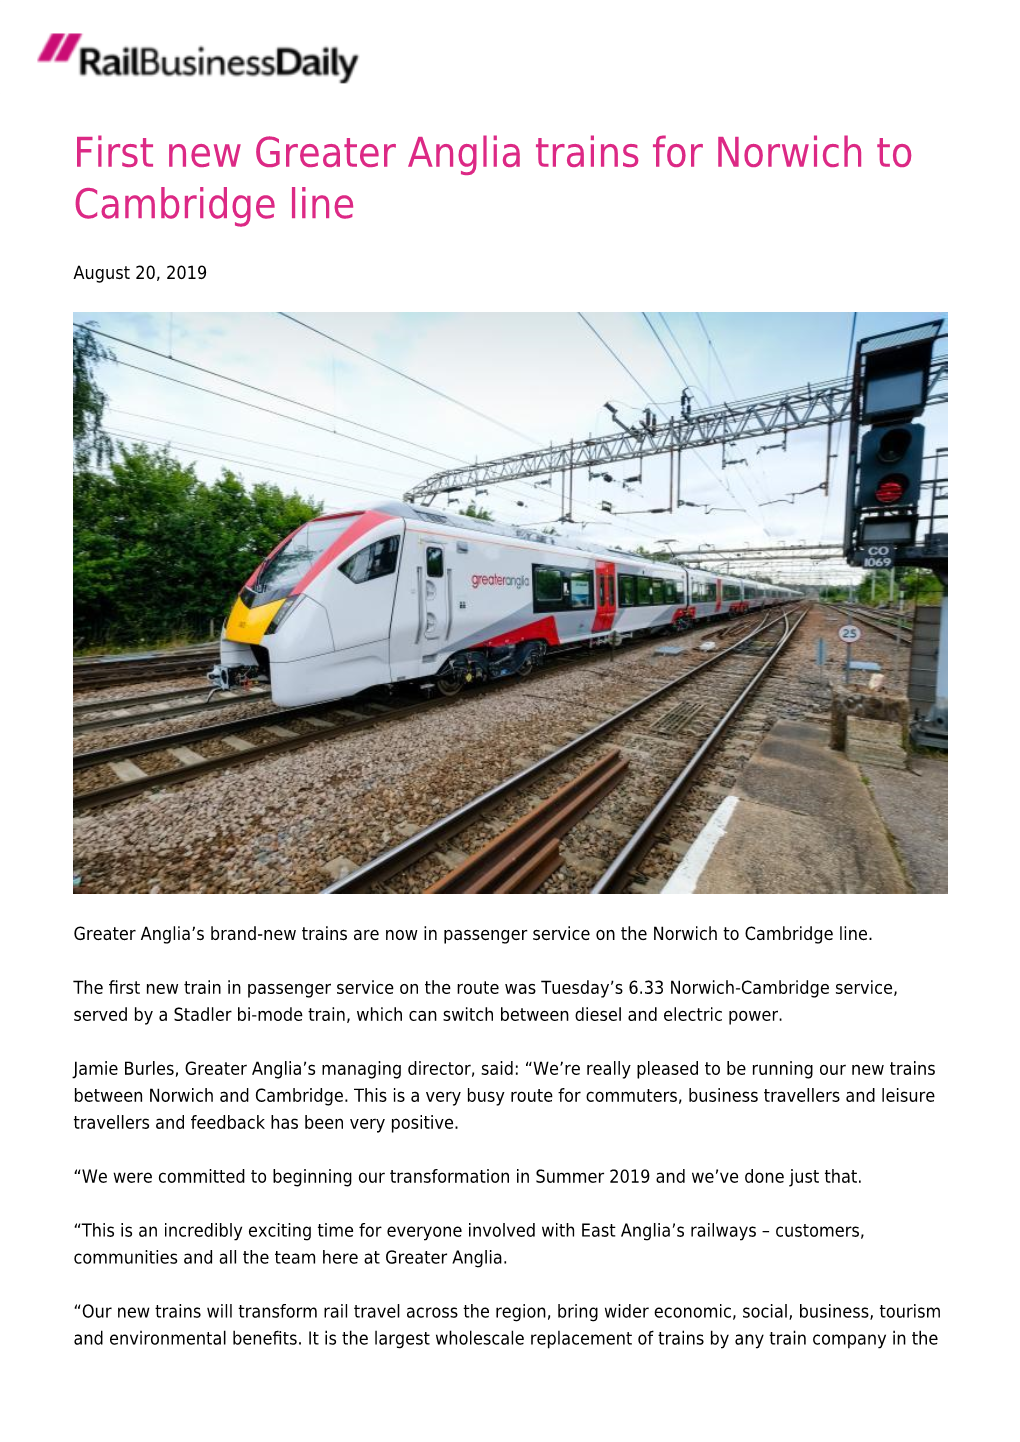 First New Greater Anglia Trains for Norwich to Cambridge Line